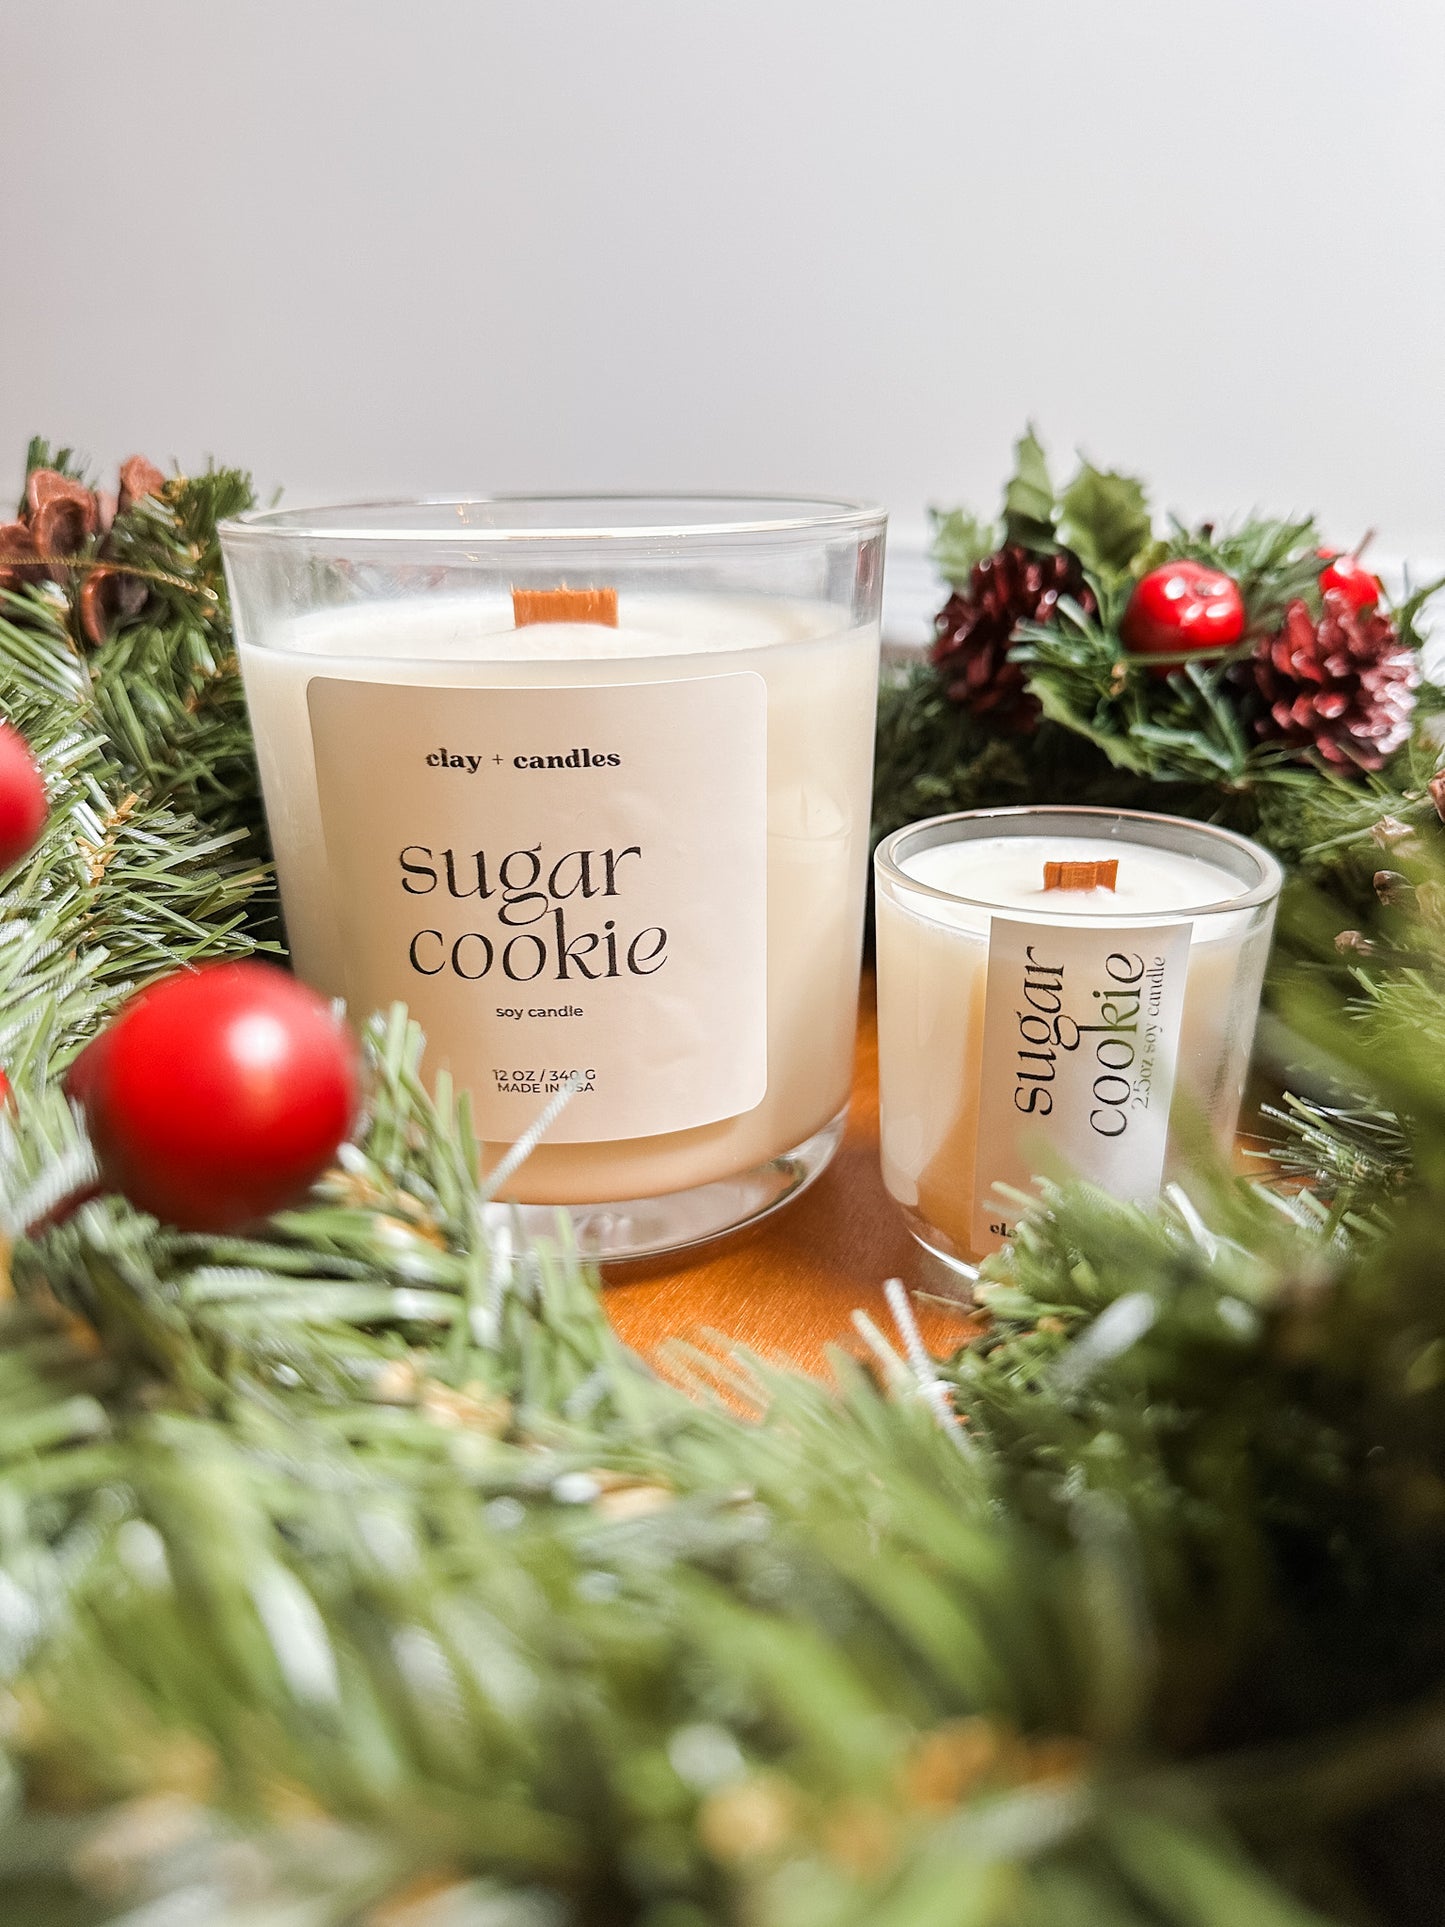 Sugar Cookie | Scented Soy Candle | Limited Edition